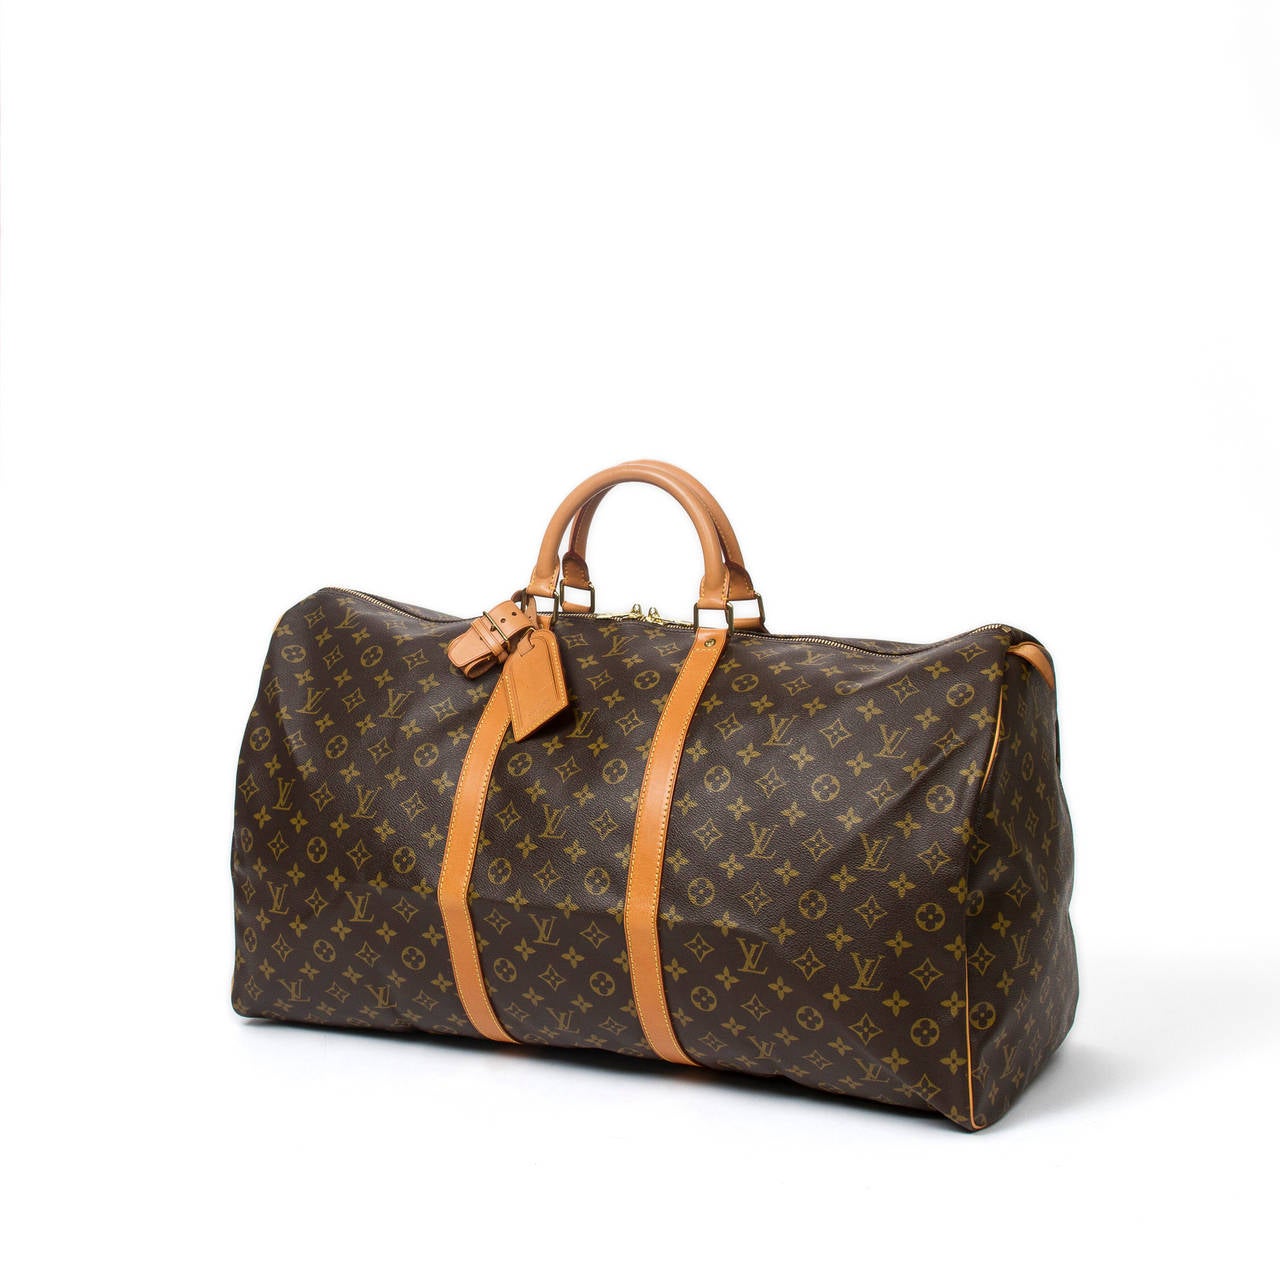 Keepall 60 in monogram canvas with vachetta leather handles, luggage tag, handle strap, cadenas and keys, golden brass hardware. Brown canvas lined interior. Beautiful patina on the leather, Excellent condition.